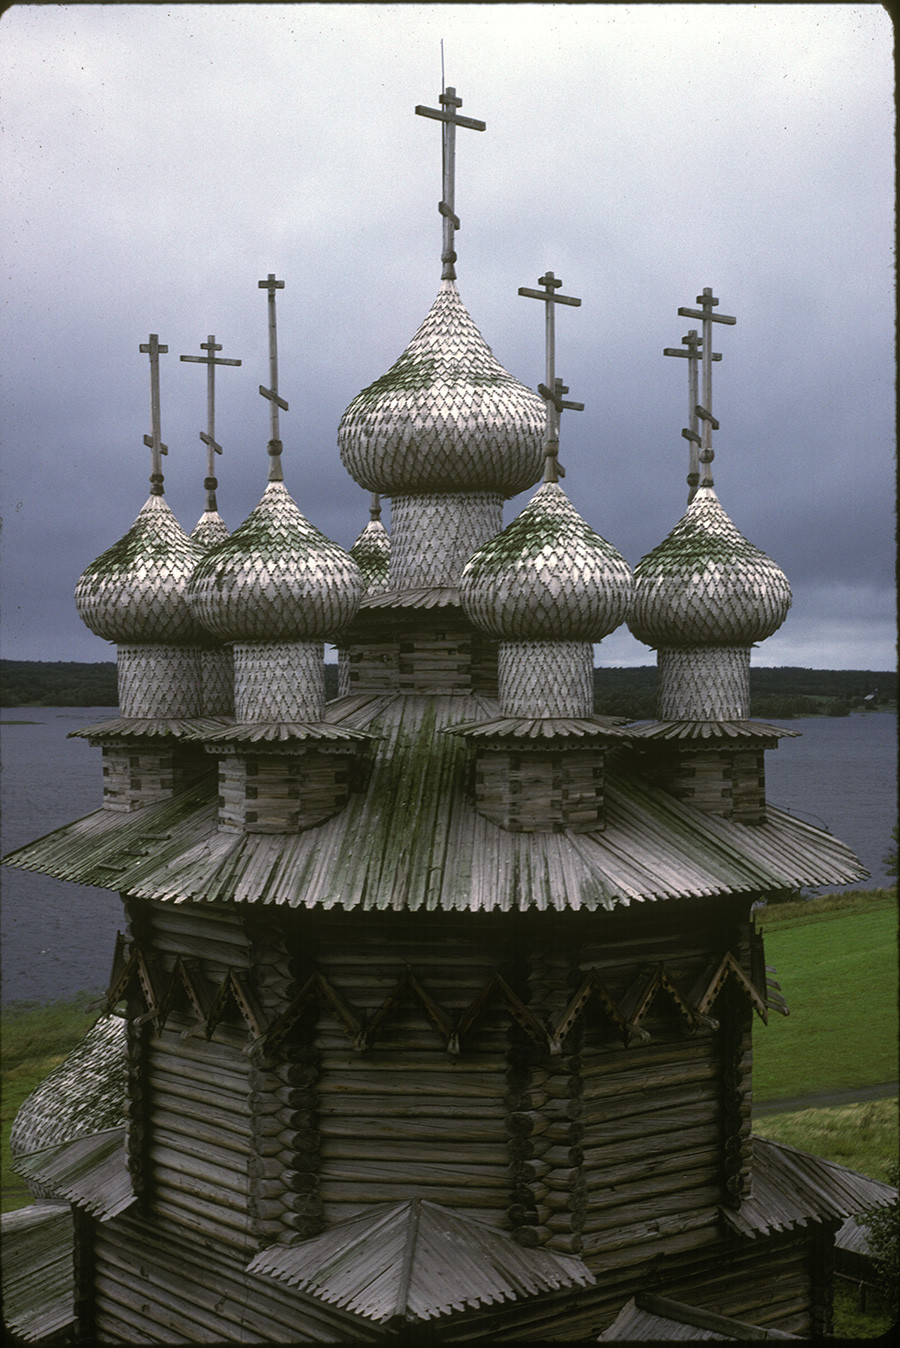  Church of the Intercession, upper structure. Northwest view taken from bell tower. July 18, 1988